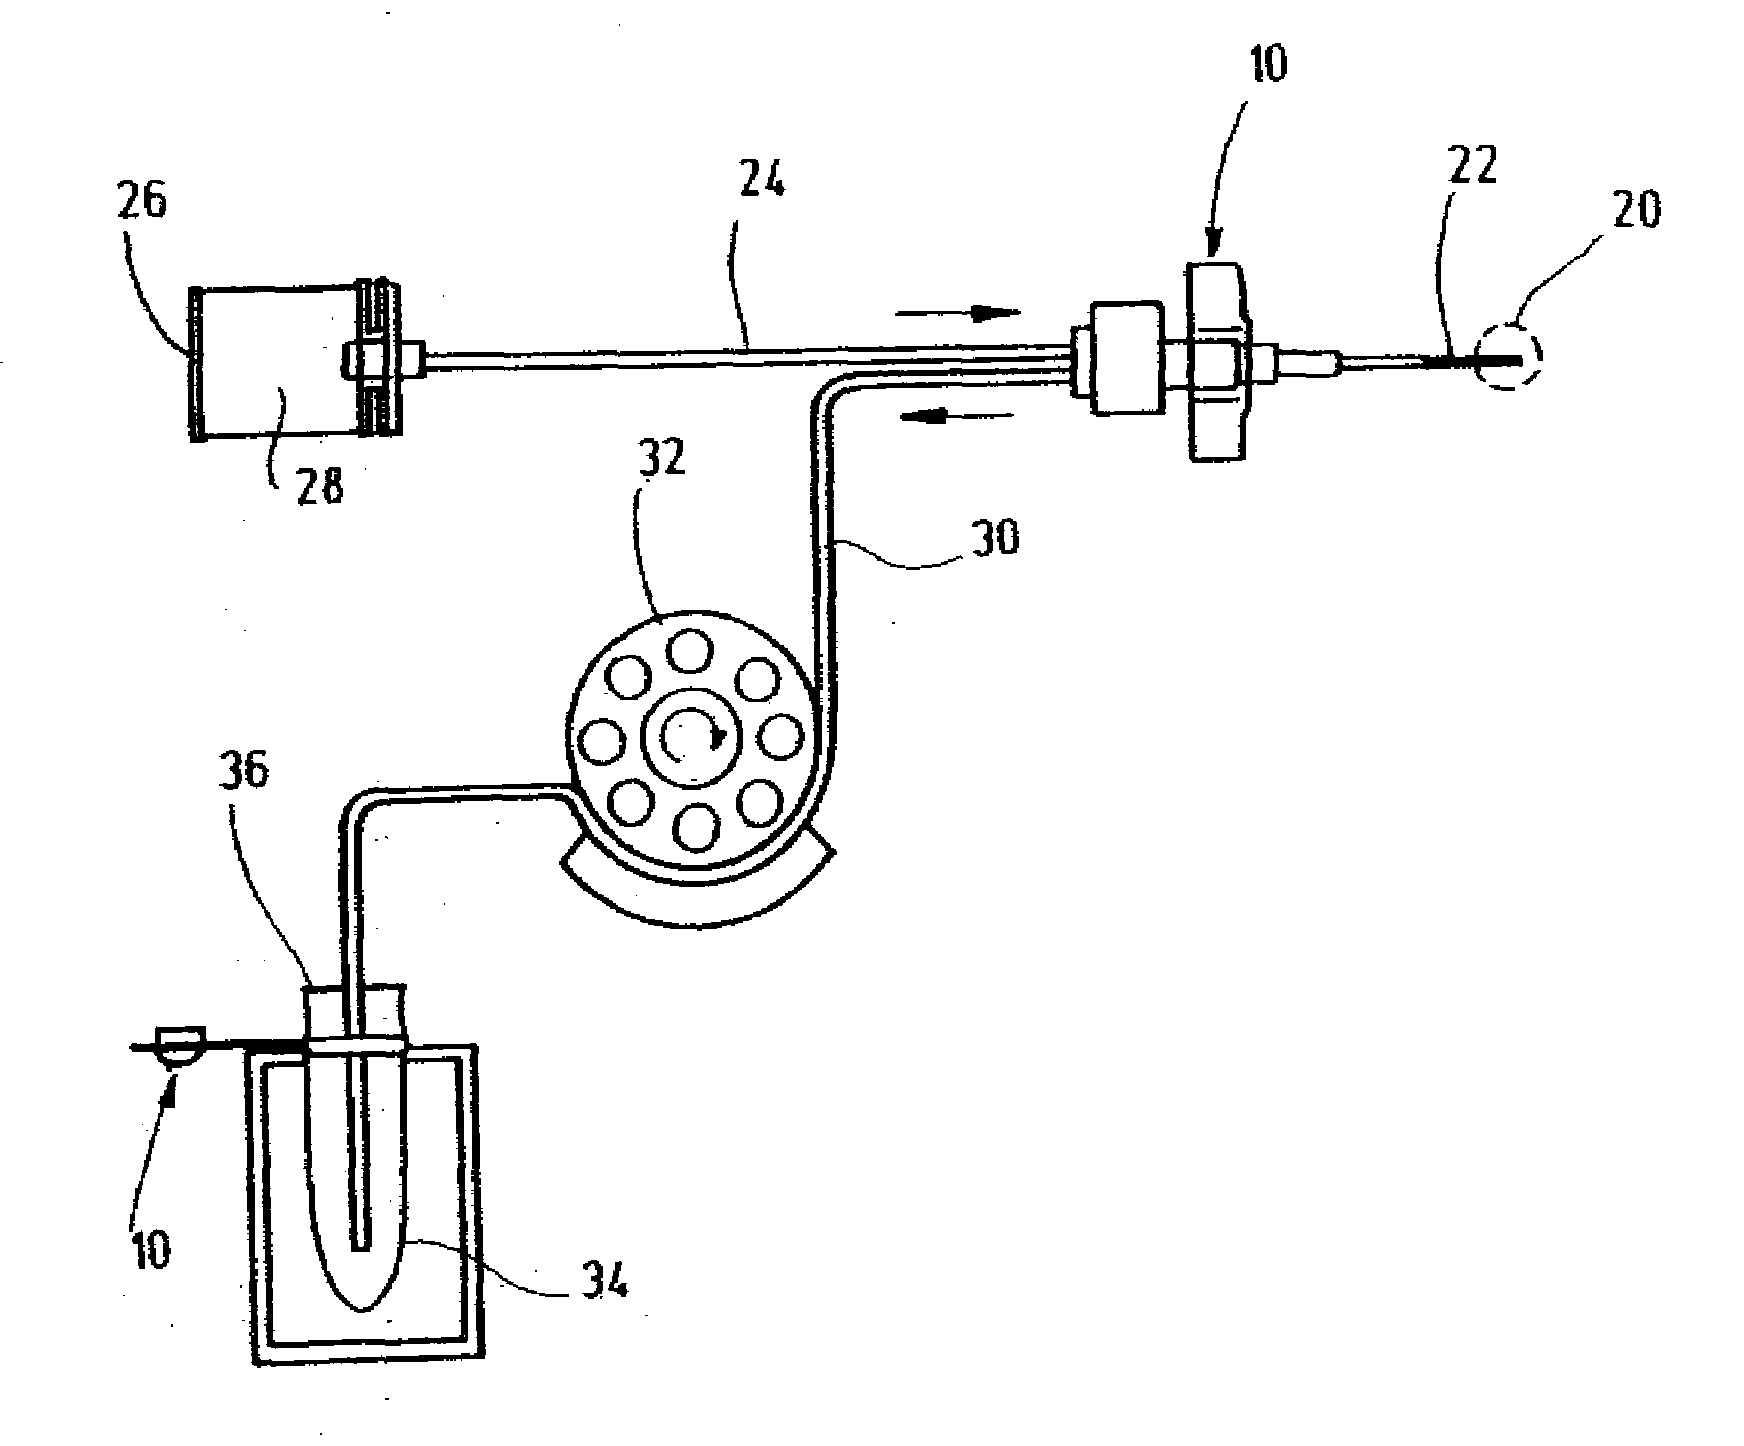 Method and Device for Determining the Glucose Concentration in Tissue Liquid